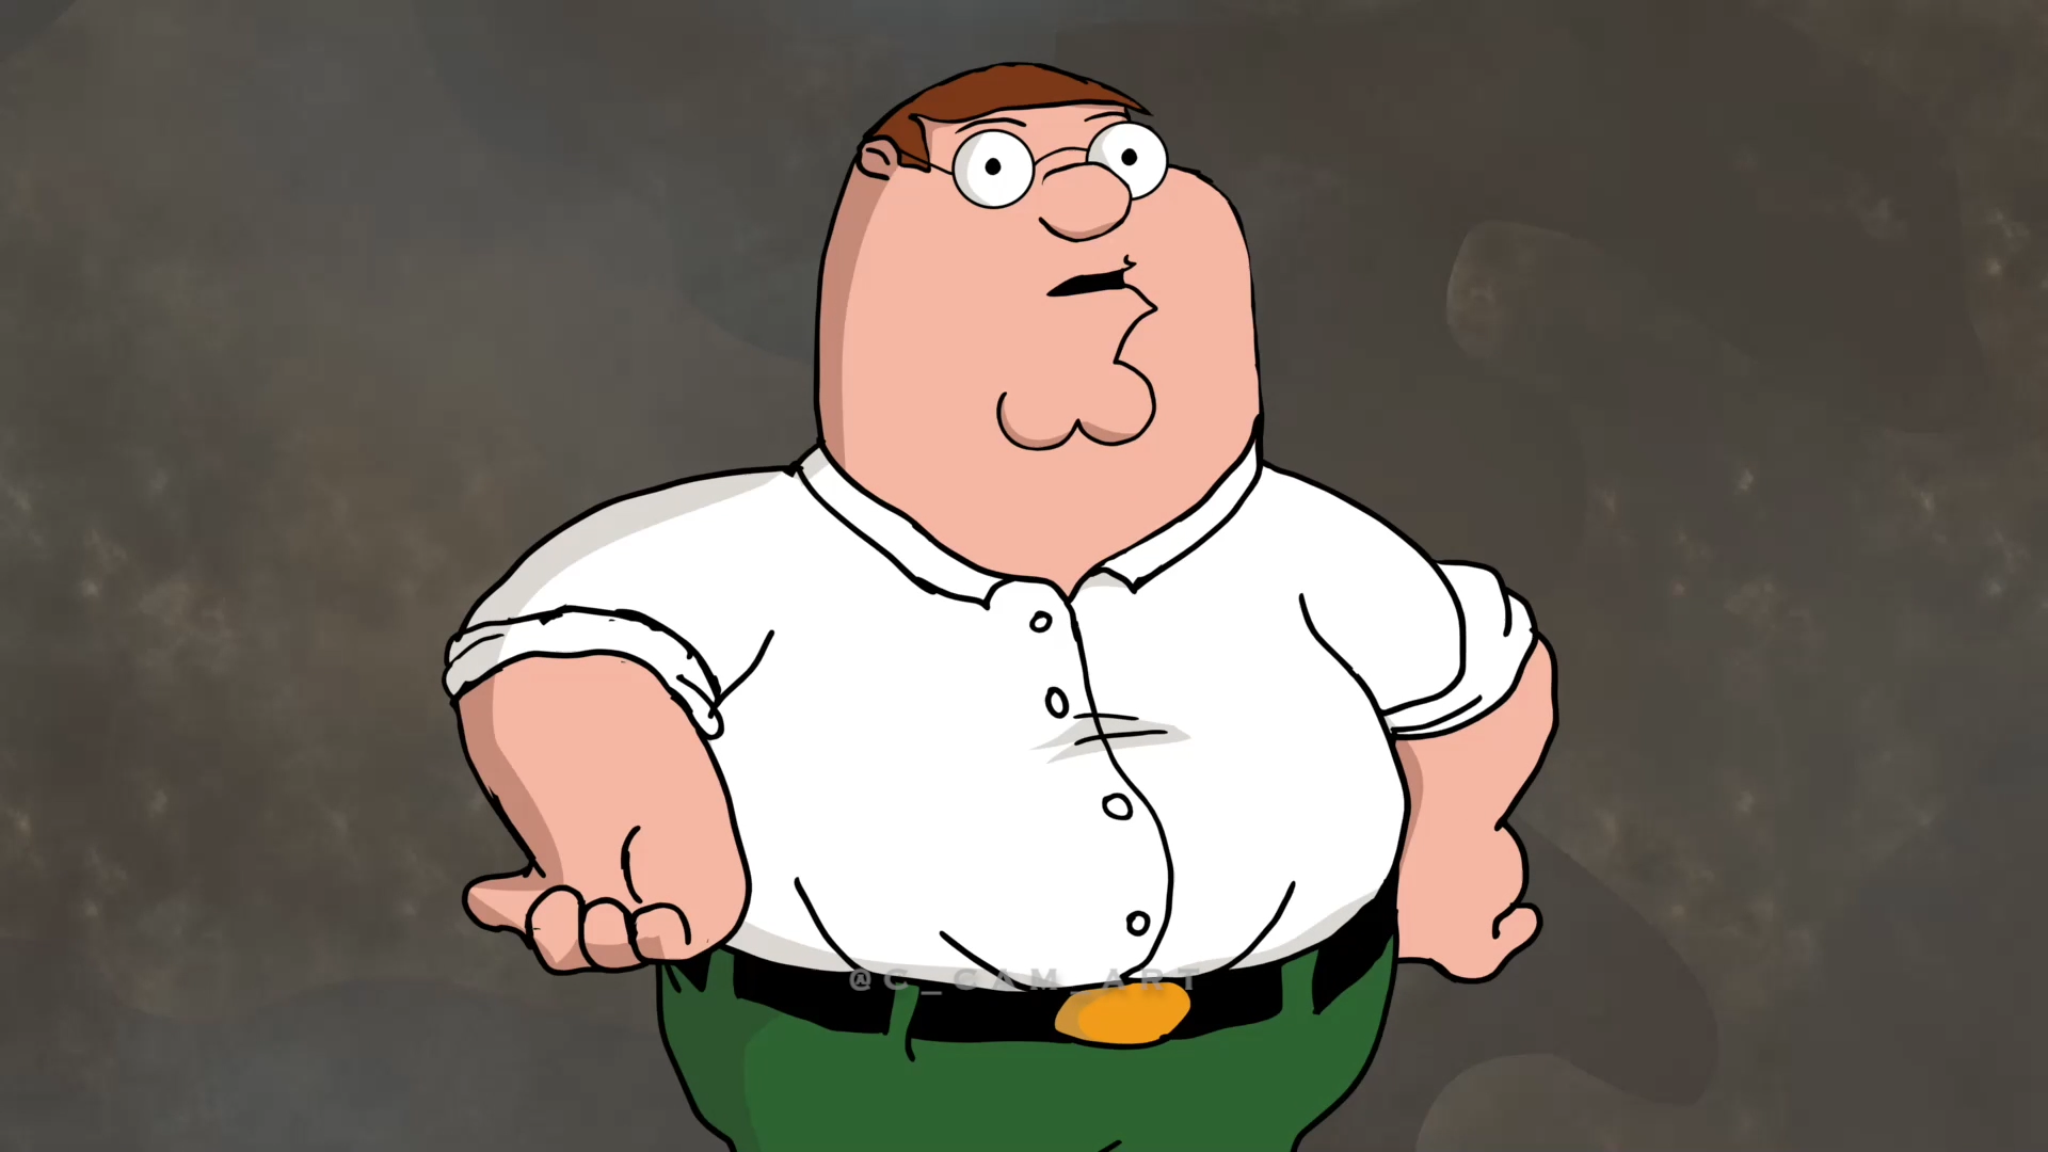 Peter Griffin's Iconic Blonde Hair - wide 3